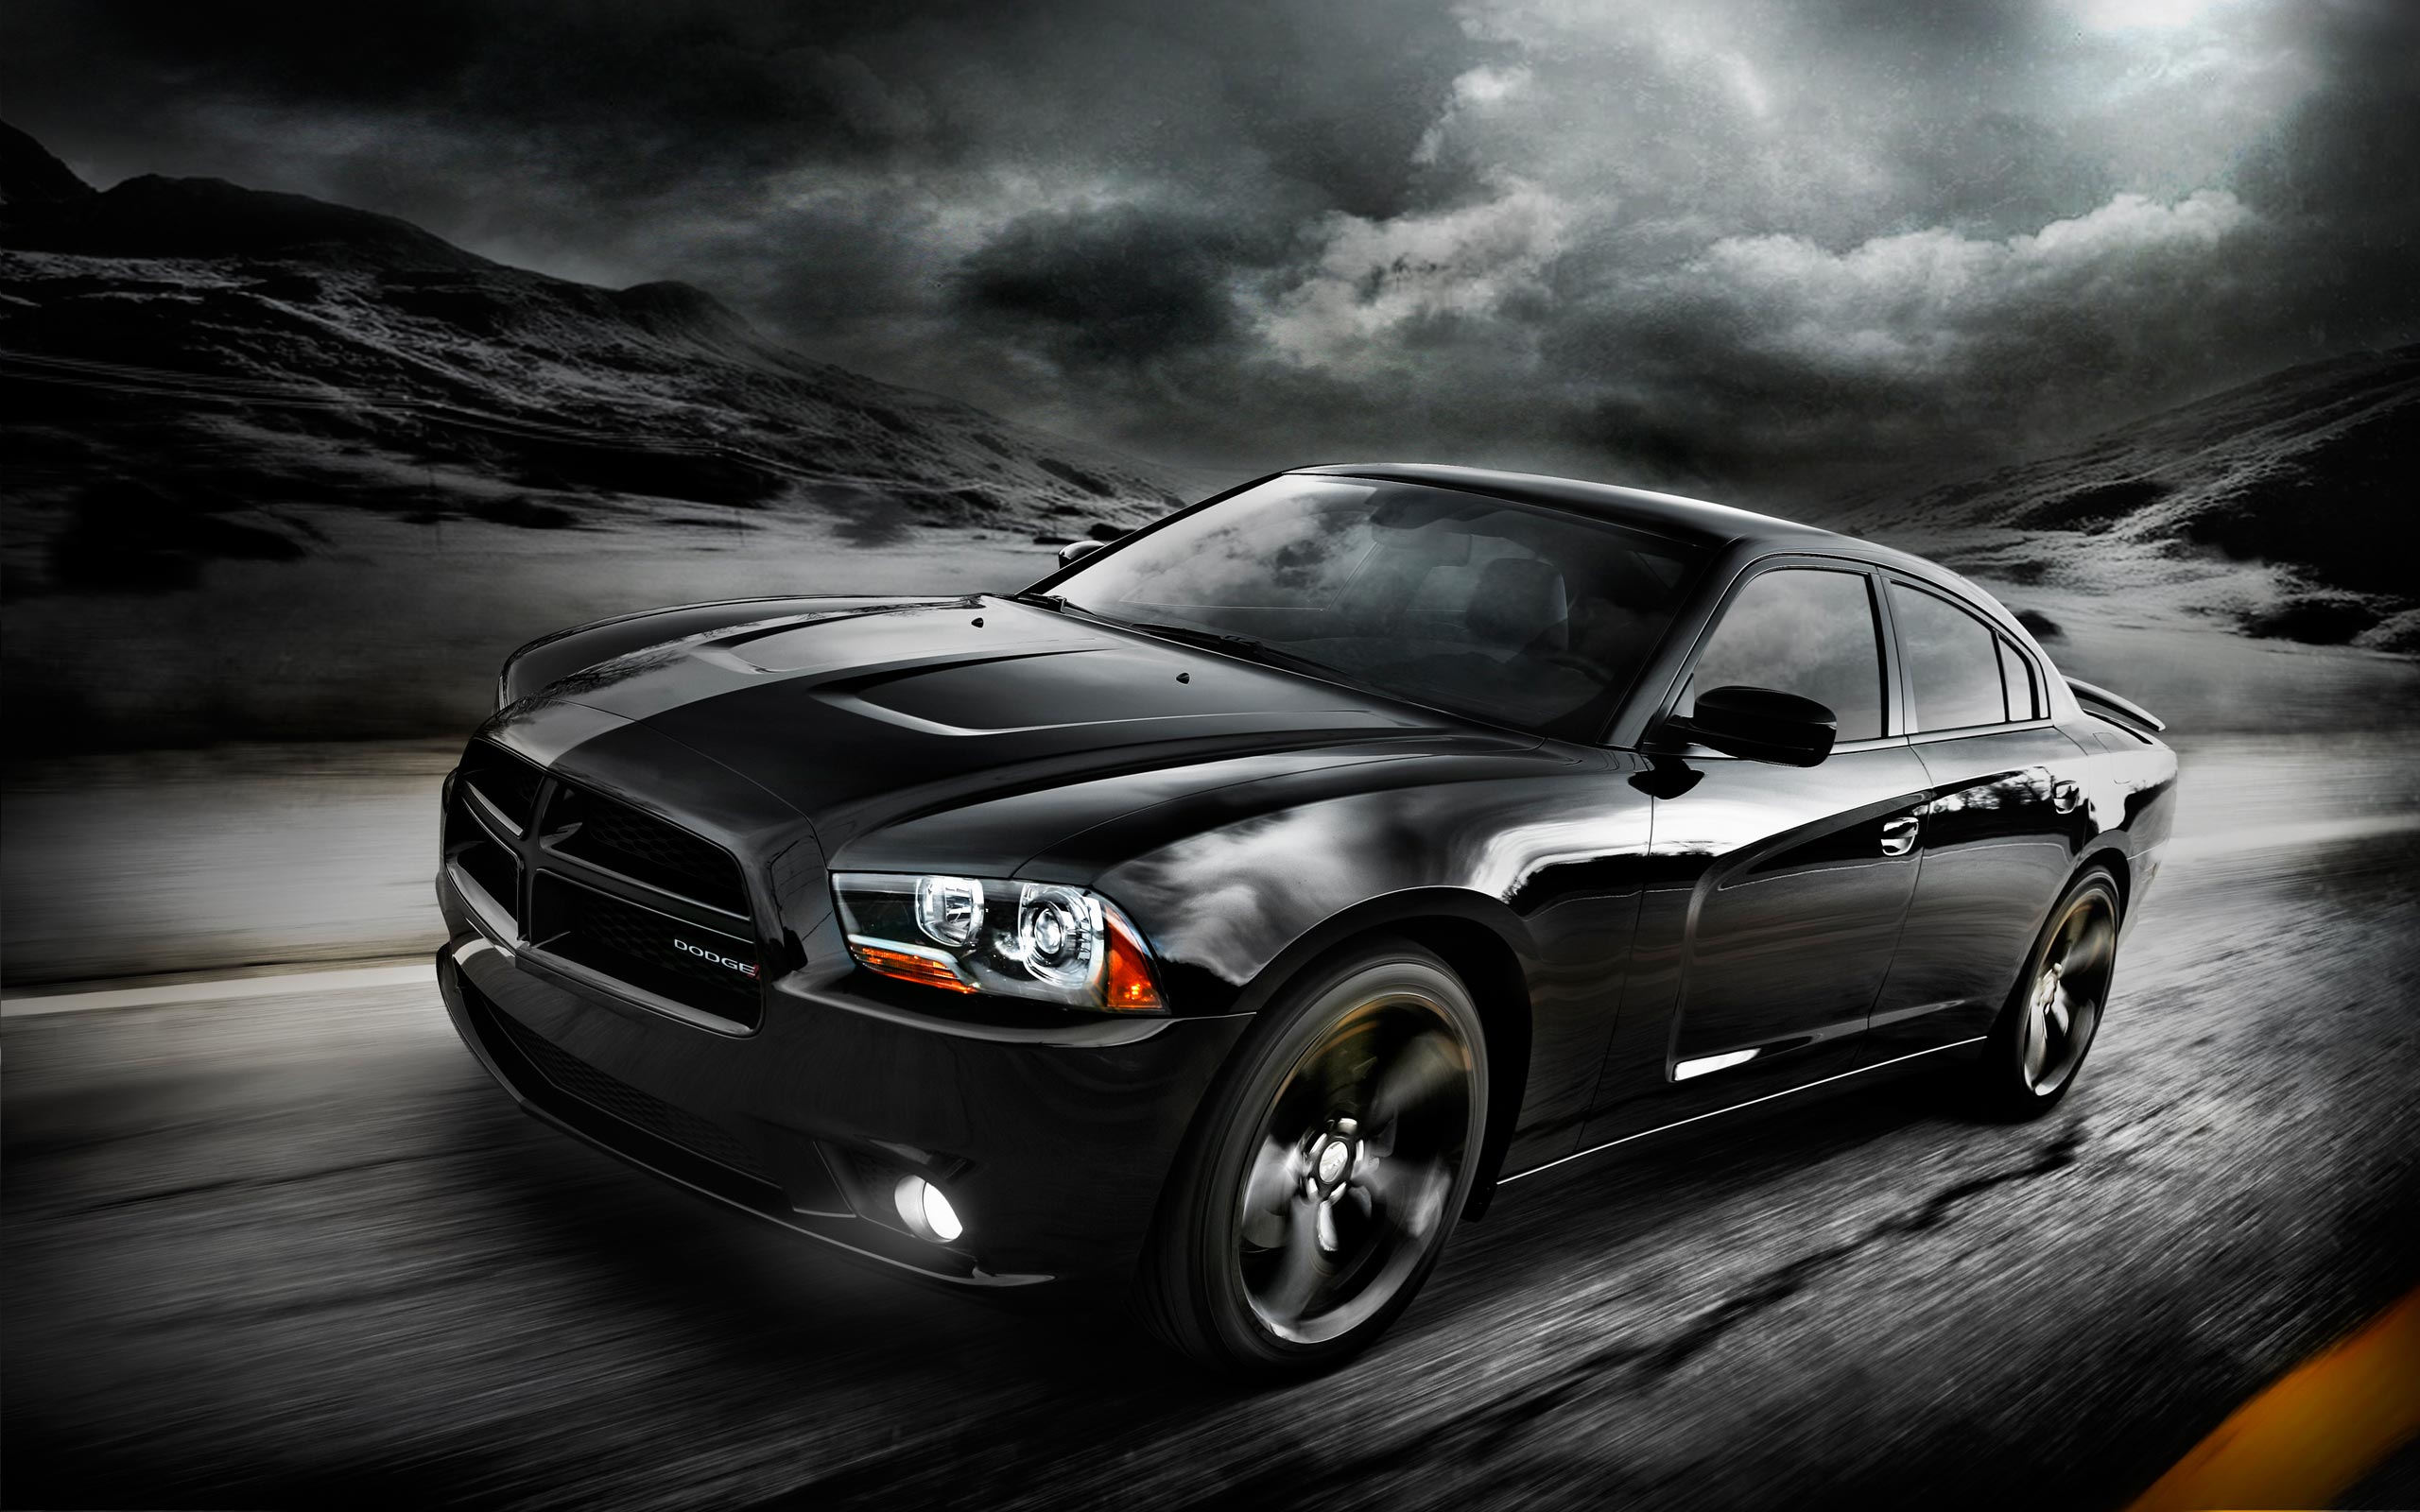 Dodge Charger iPhone 6 Wallpaper - image #183